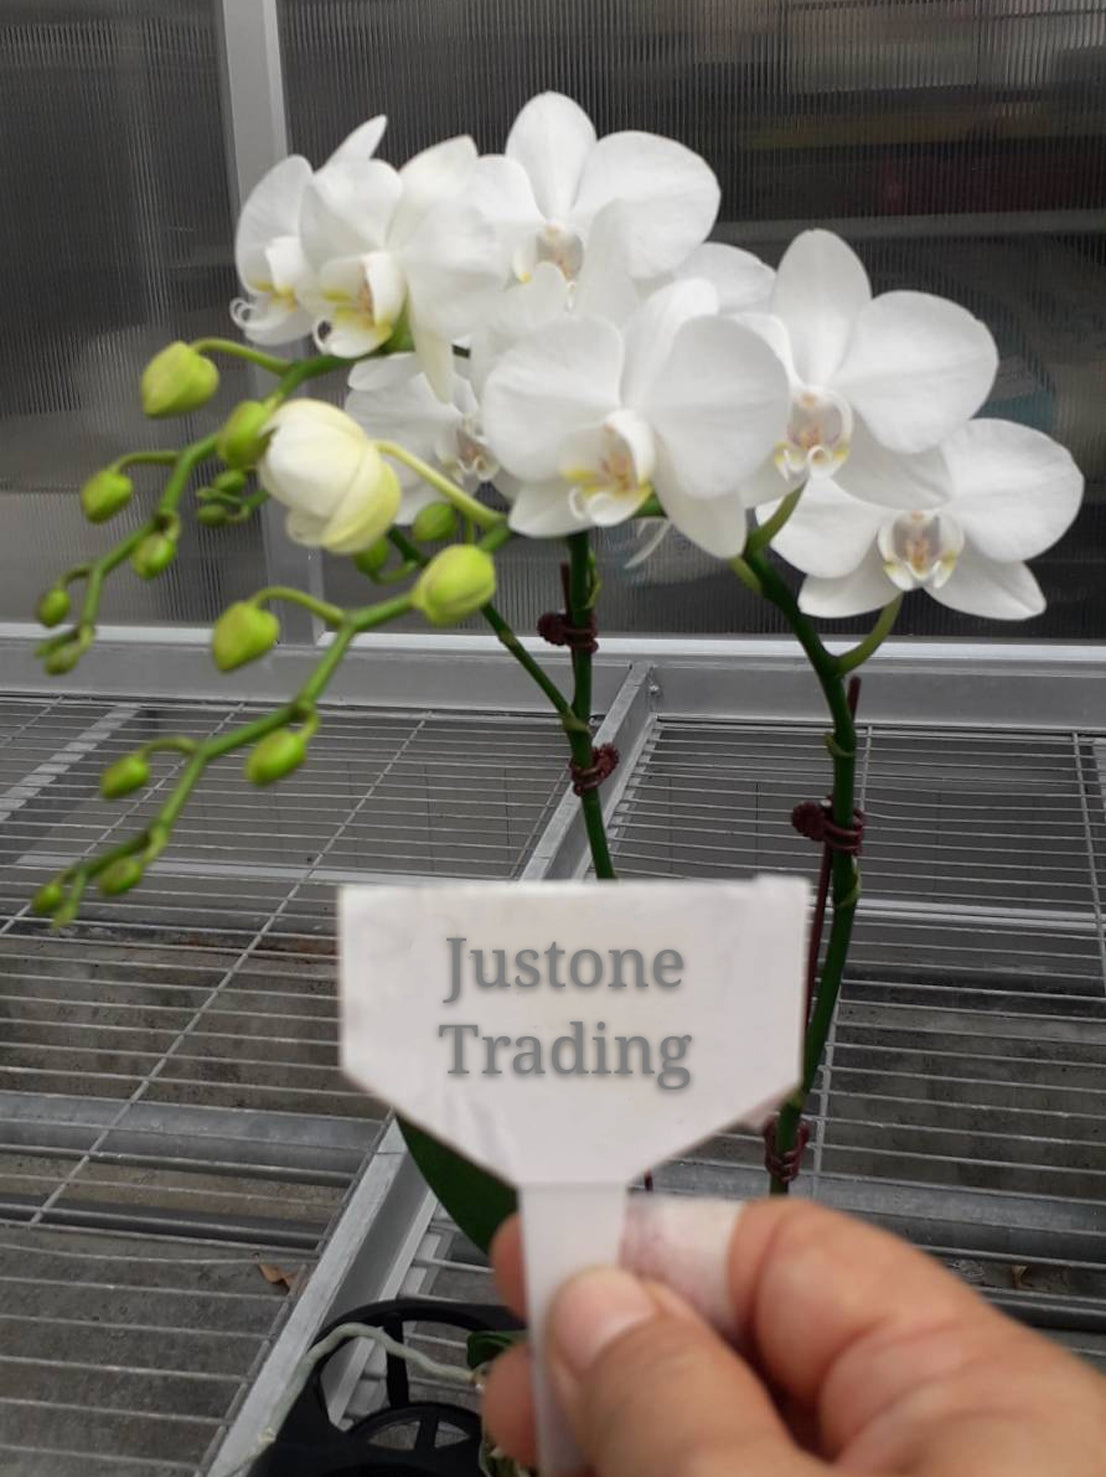 Mini White Taiwan Orchid with 2 stems / 雙梗小白台灣蝴蝶蘭 